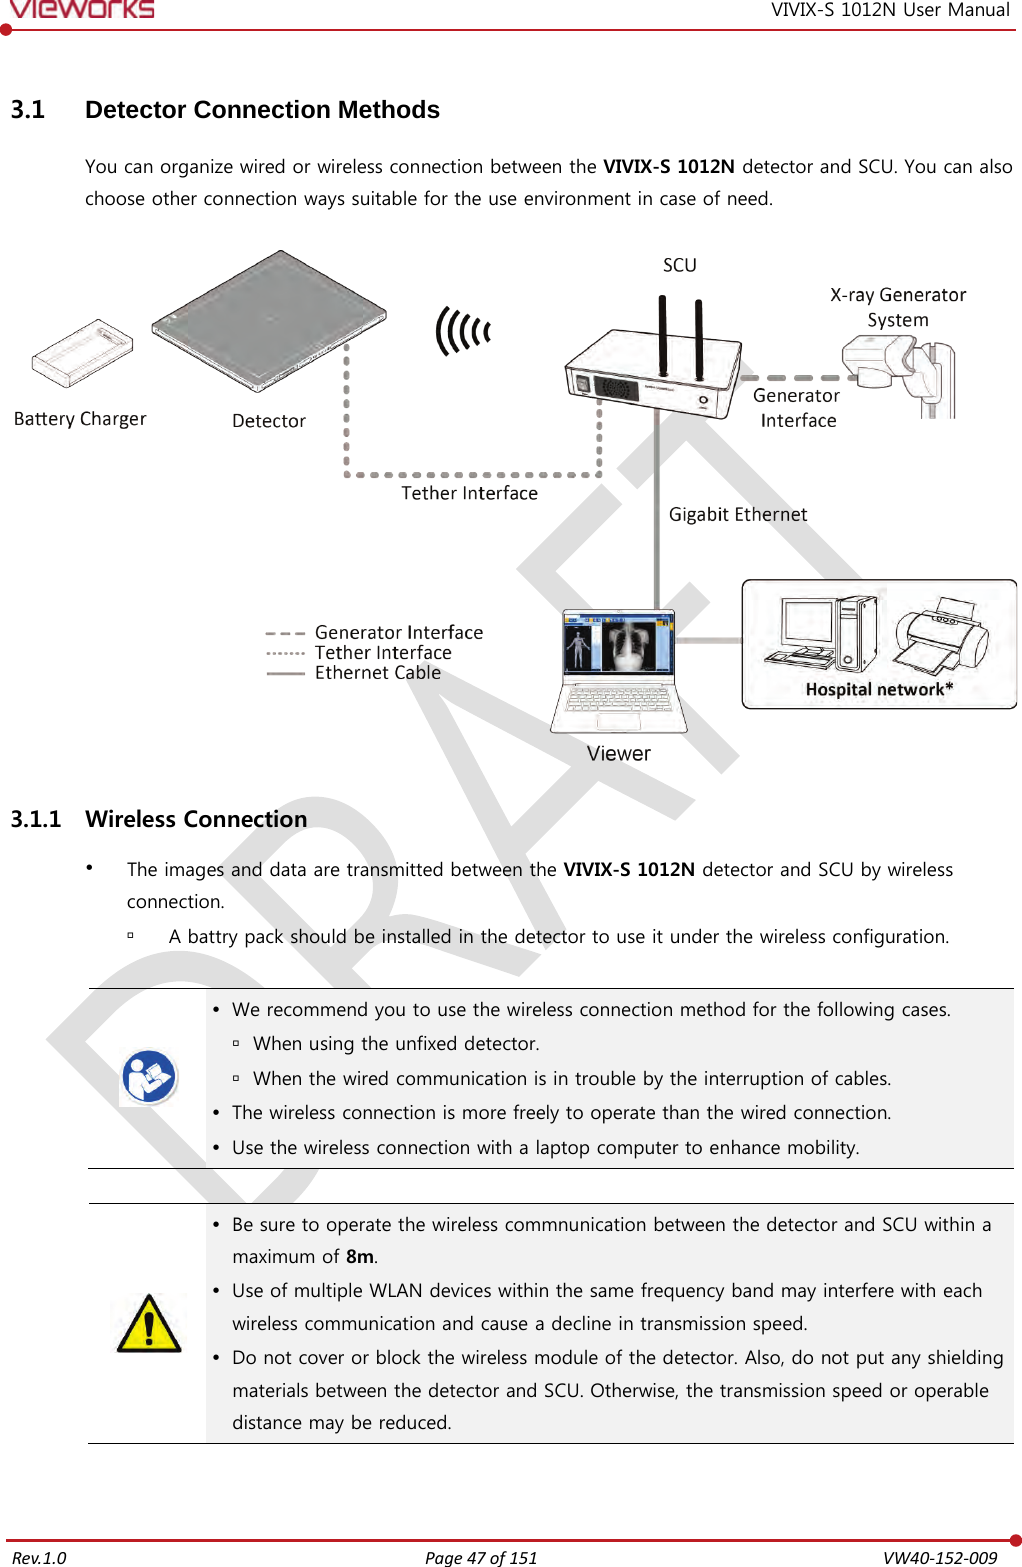   Rev.1.0 Page 47 of 151  VW40-152-009 VIVIX-S 1012N User Manual 3.1 Detector Connection Methods You can organize wired or wireless connection between the VIVIX-S 1012N detector and SCU. You can also choose other connection ways suitable for the use environment in case of need.   3.1.1 Wireless Connection  The images and data are transmitted between the VIVIX-S 1012N detector and SCU by wireless connection.  A battry pack should be installed in the detector to use it under the wireless configuration.    We recommend you to use the wireless connection method for the following cases.  When using the unfixed detector.  When the wired communication is in trouble by the interruption of cables.  The wireless connection is more freely to operate than the wired connection.  Use the wireless connection with a laptop computer to enhance mobility.    Be sure to operate the wireless commnunication between the detector and SCU within a maximum of 8m.  Use of multiple WLAN devices within the same frequency band may interfere with each wireless communication and cause a decline in transmission speed.  Do not cover or block the wireless module of the detector. Also, do not put any shielding materials between the detector and SCU. Otherwise, the transmission speed or operable distance may be reduced.   